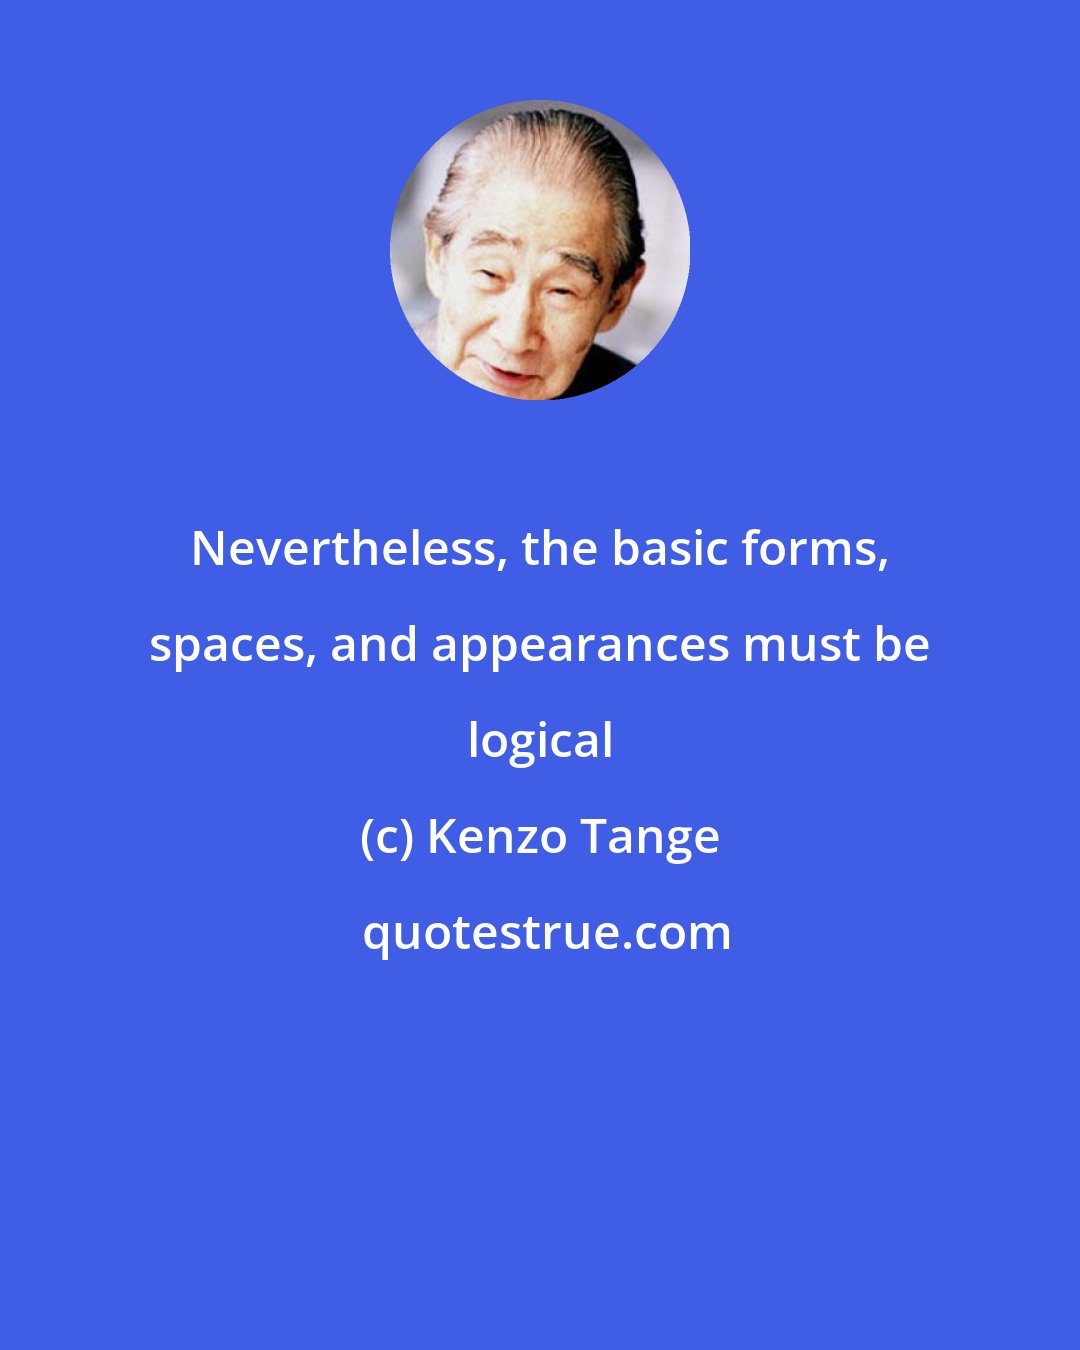 Kenzo Tange: Nevertheless, the basic forms, spaces, and appearances must be logical